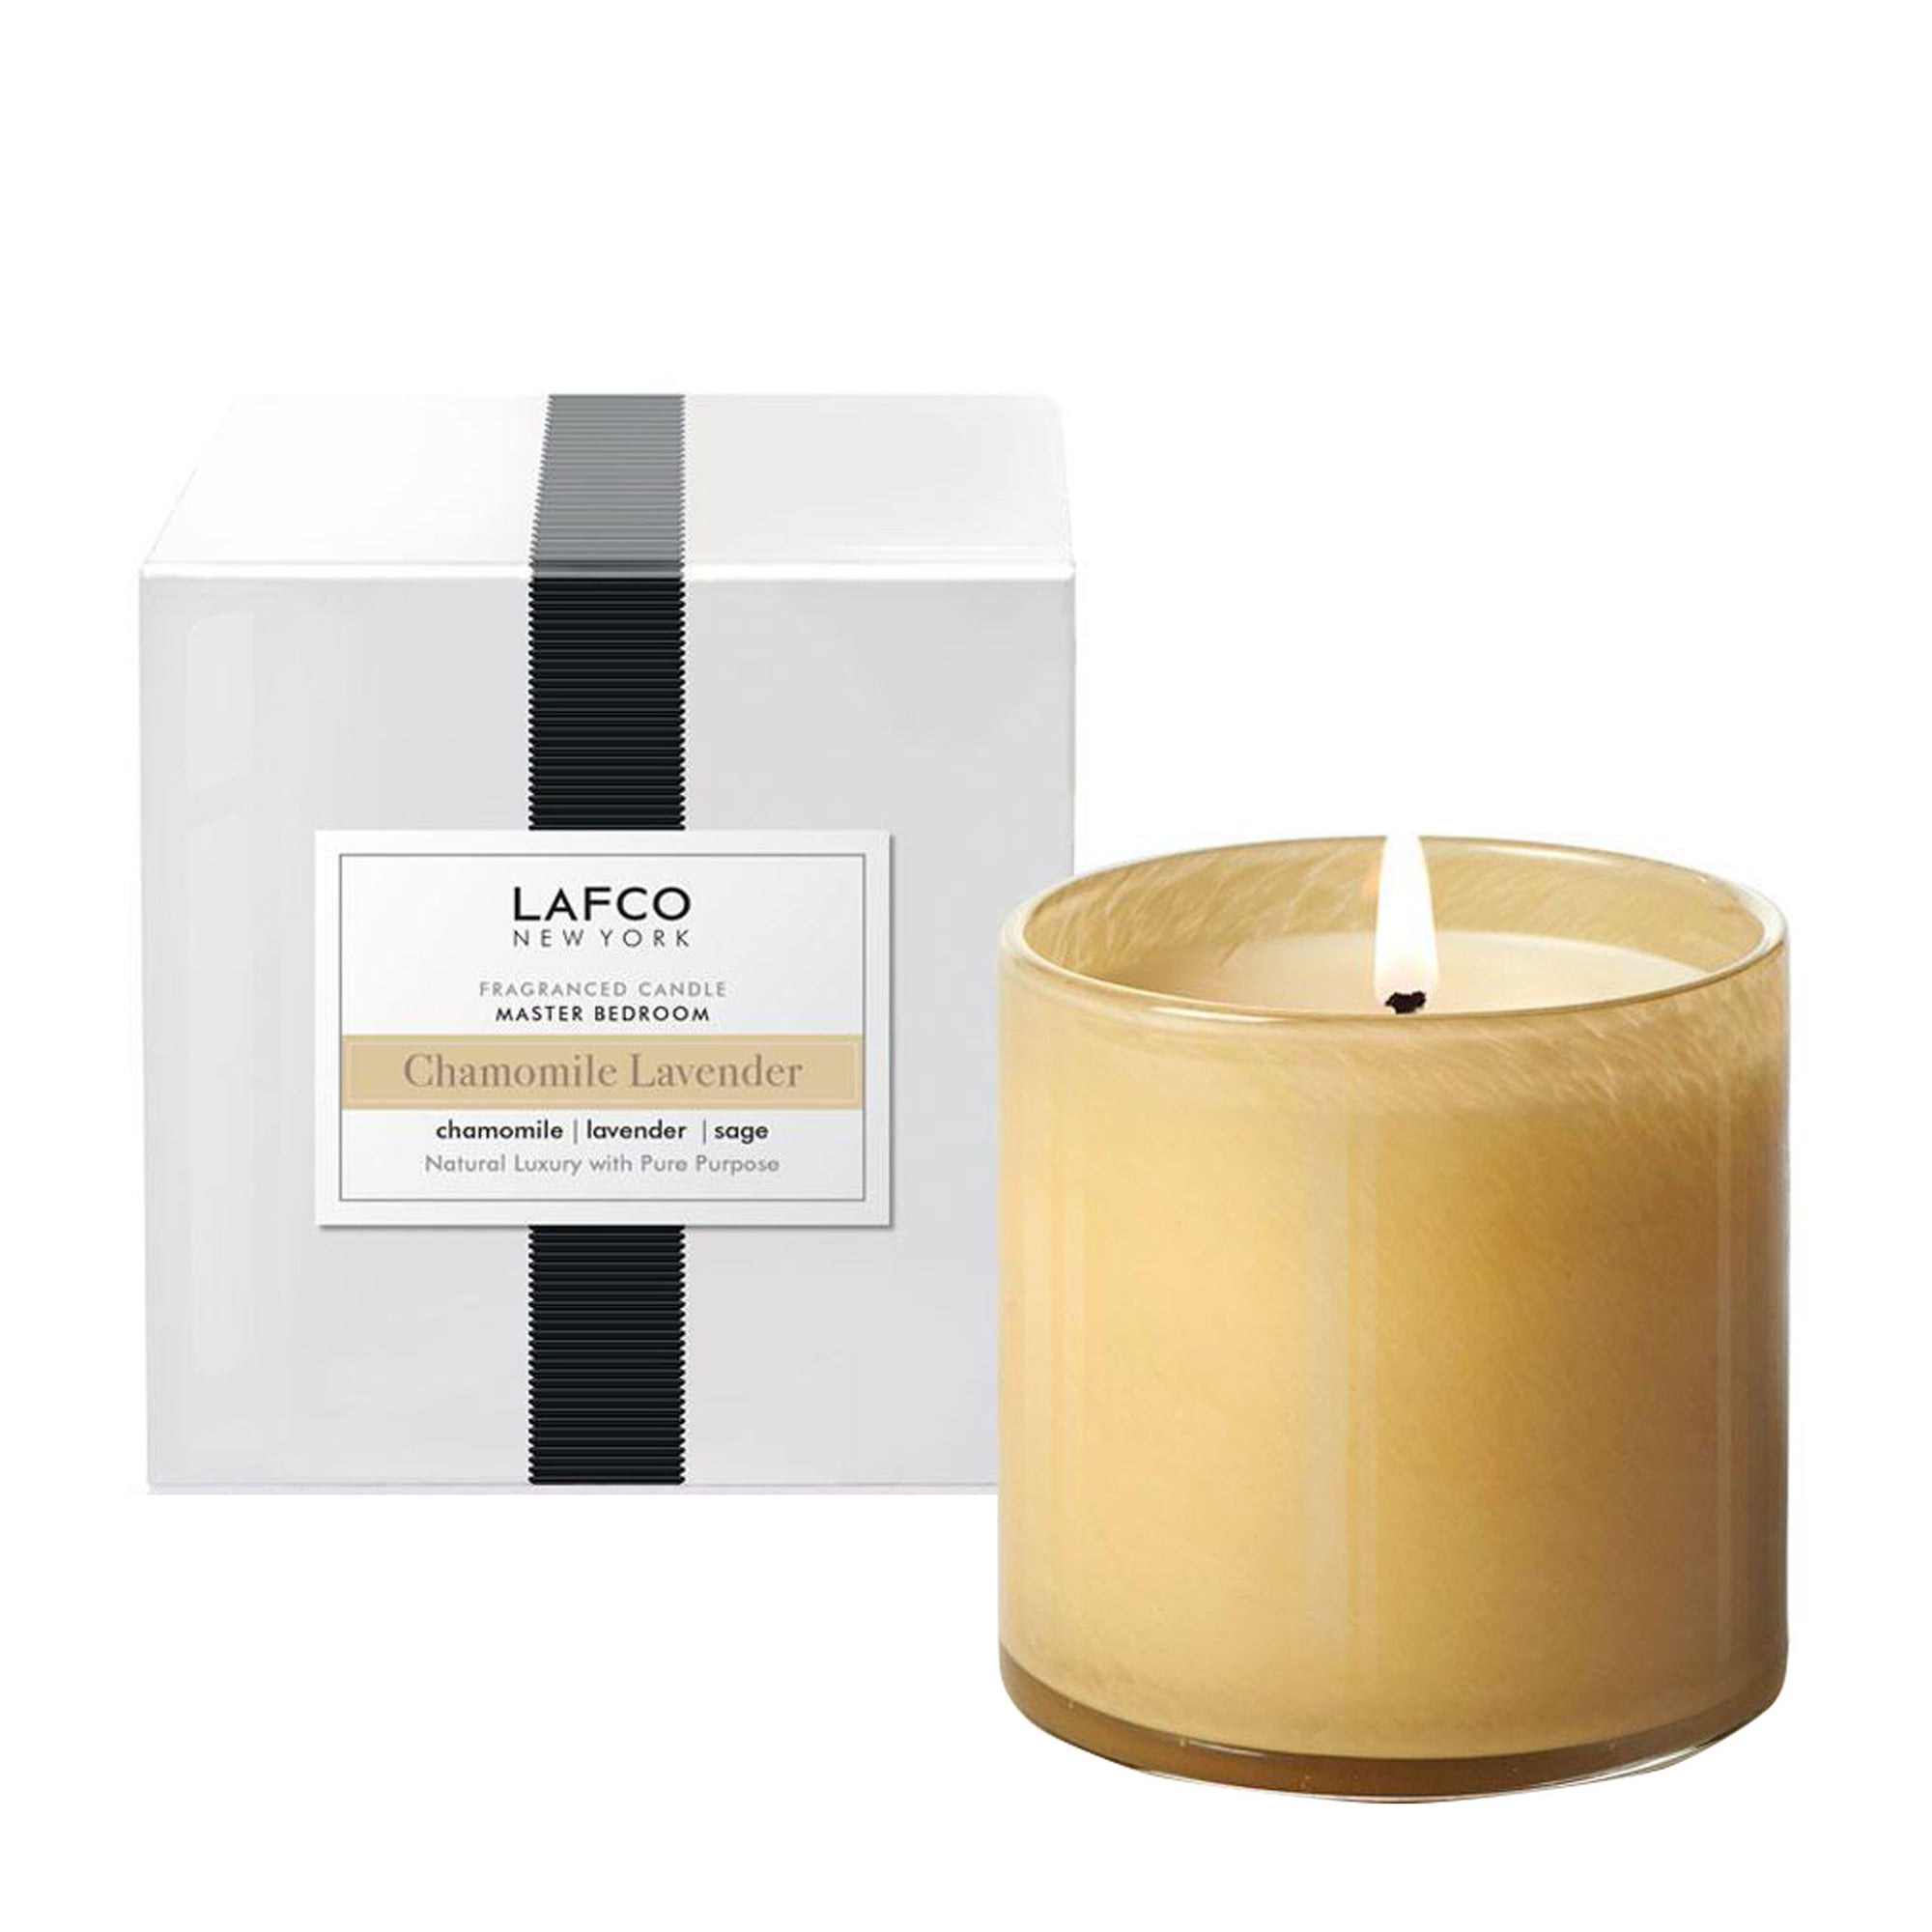 Lafco Master Bedroom | Chamomile Lavender Candle